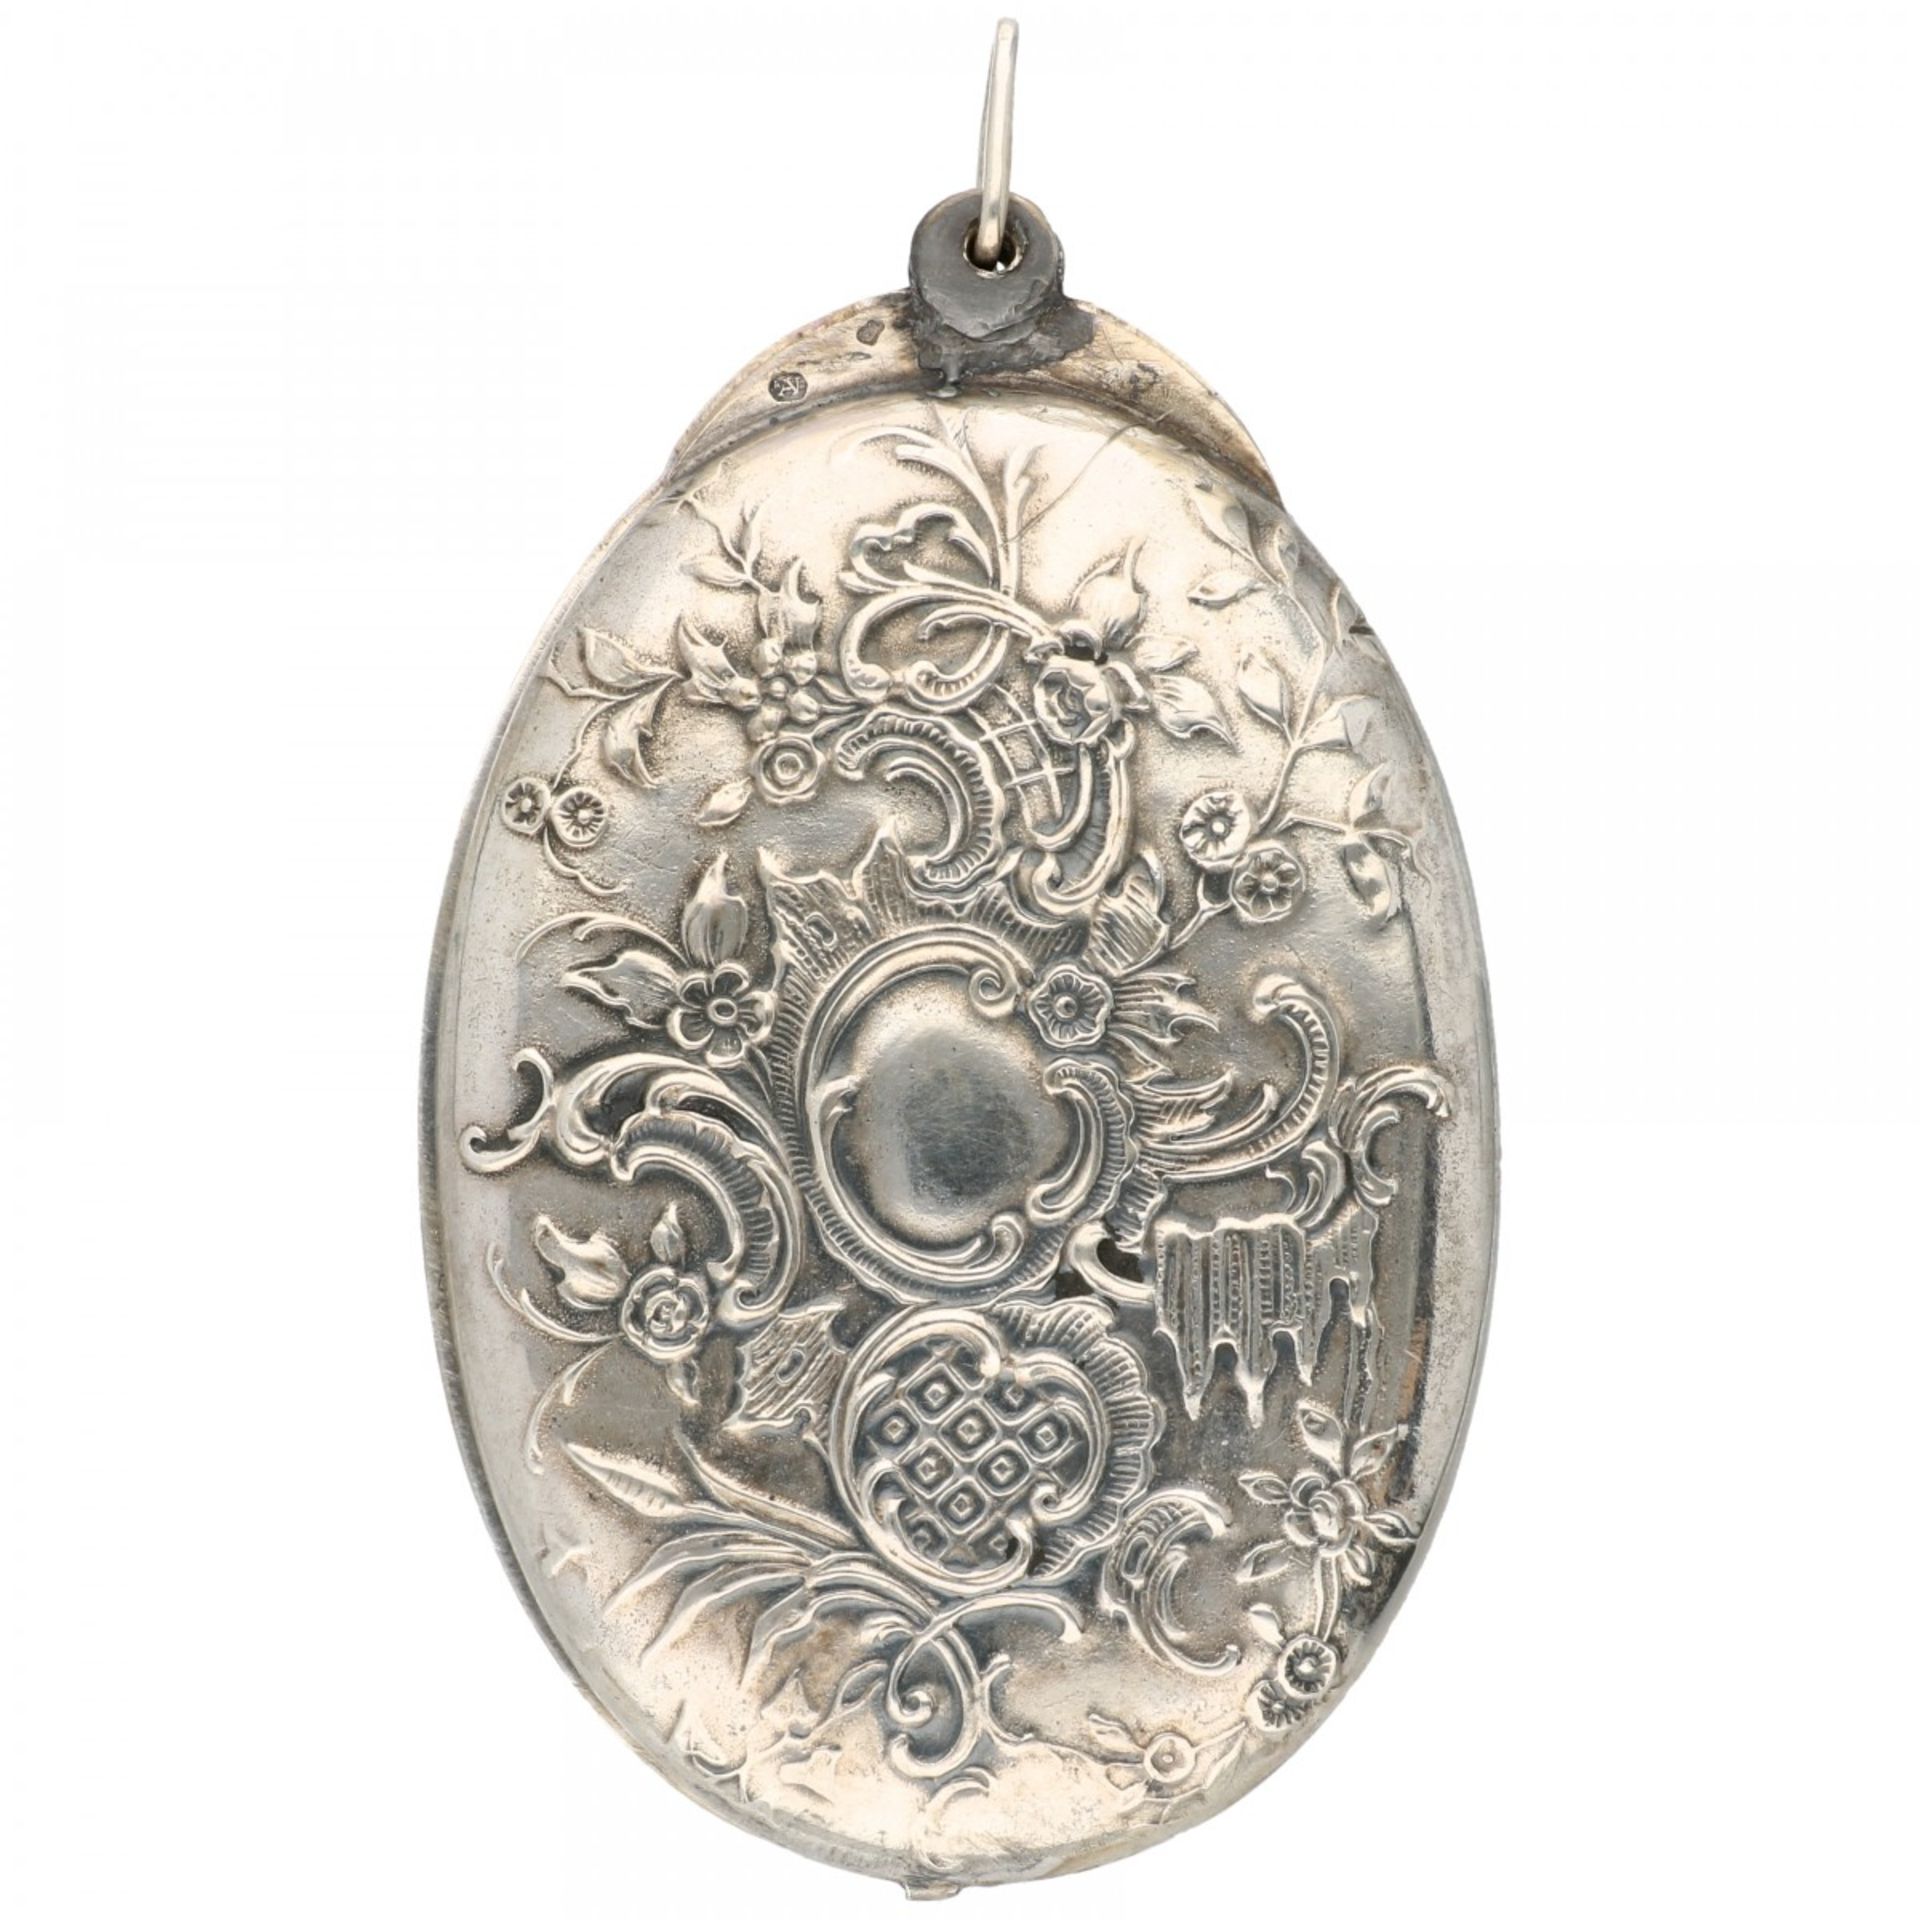 Silver richly decorated medallion mirror pendant - 800/1000. - Image 2 of 2